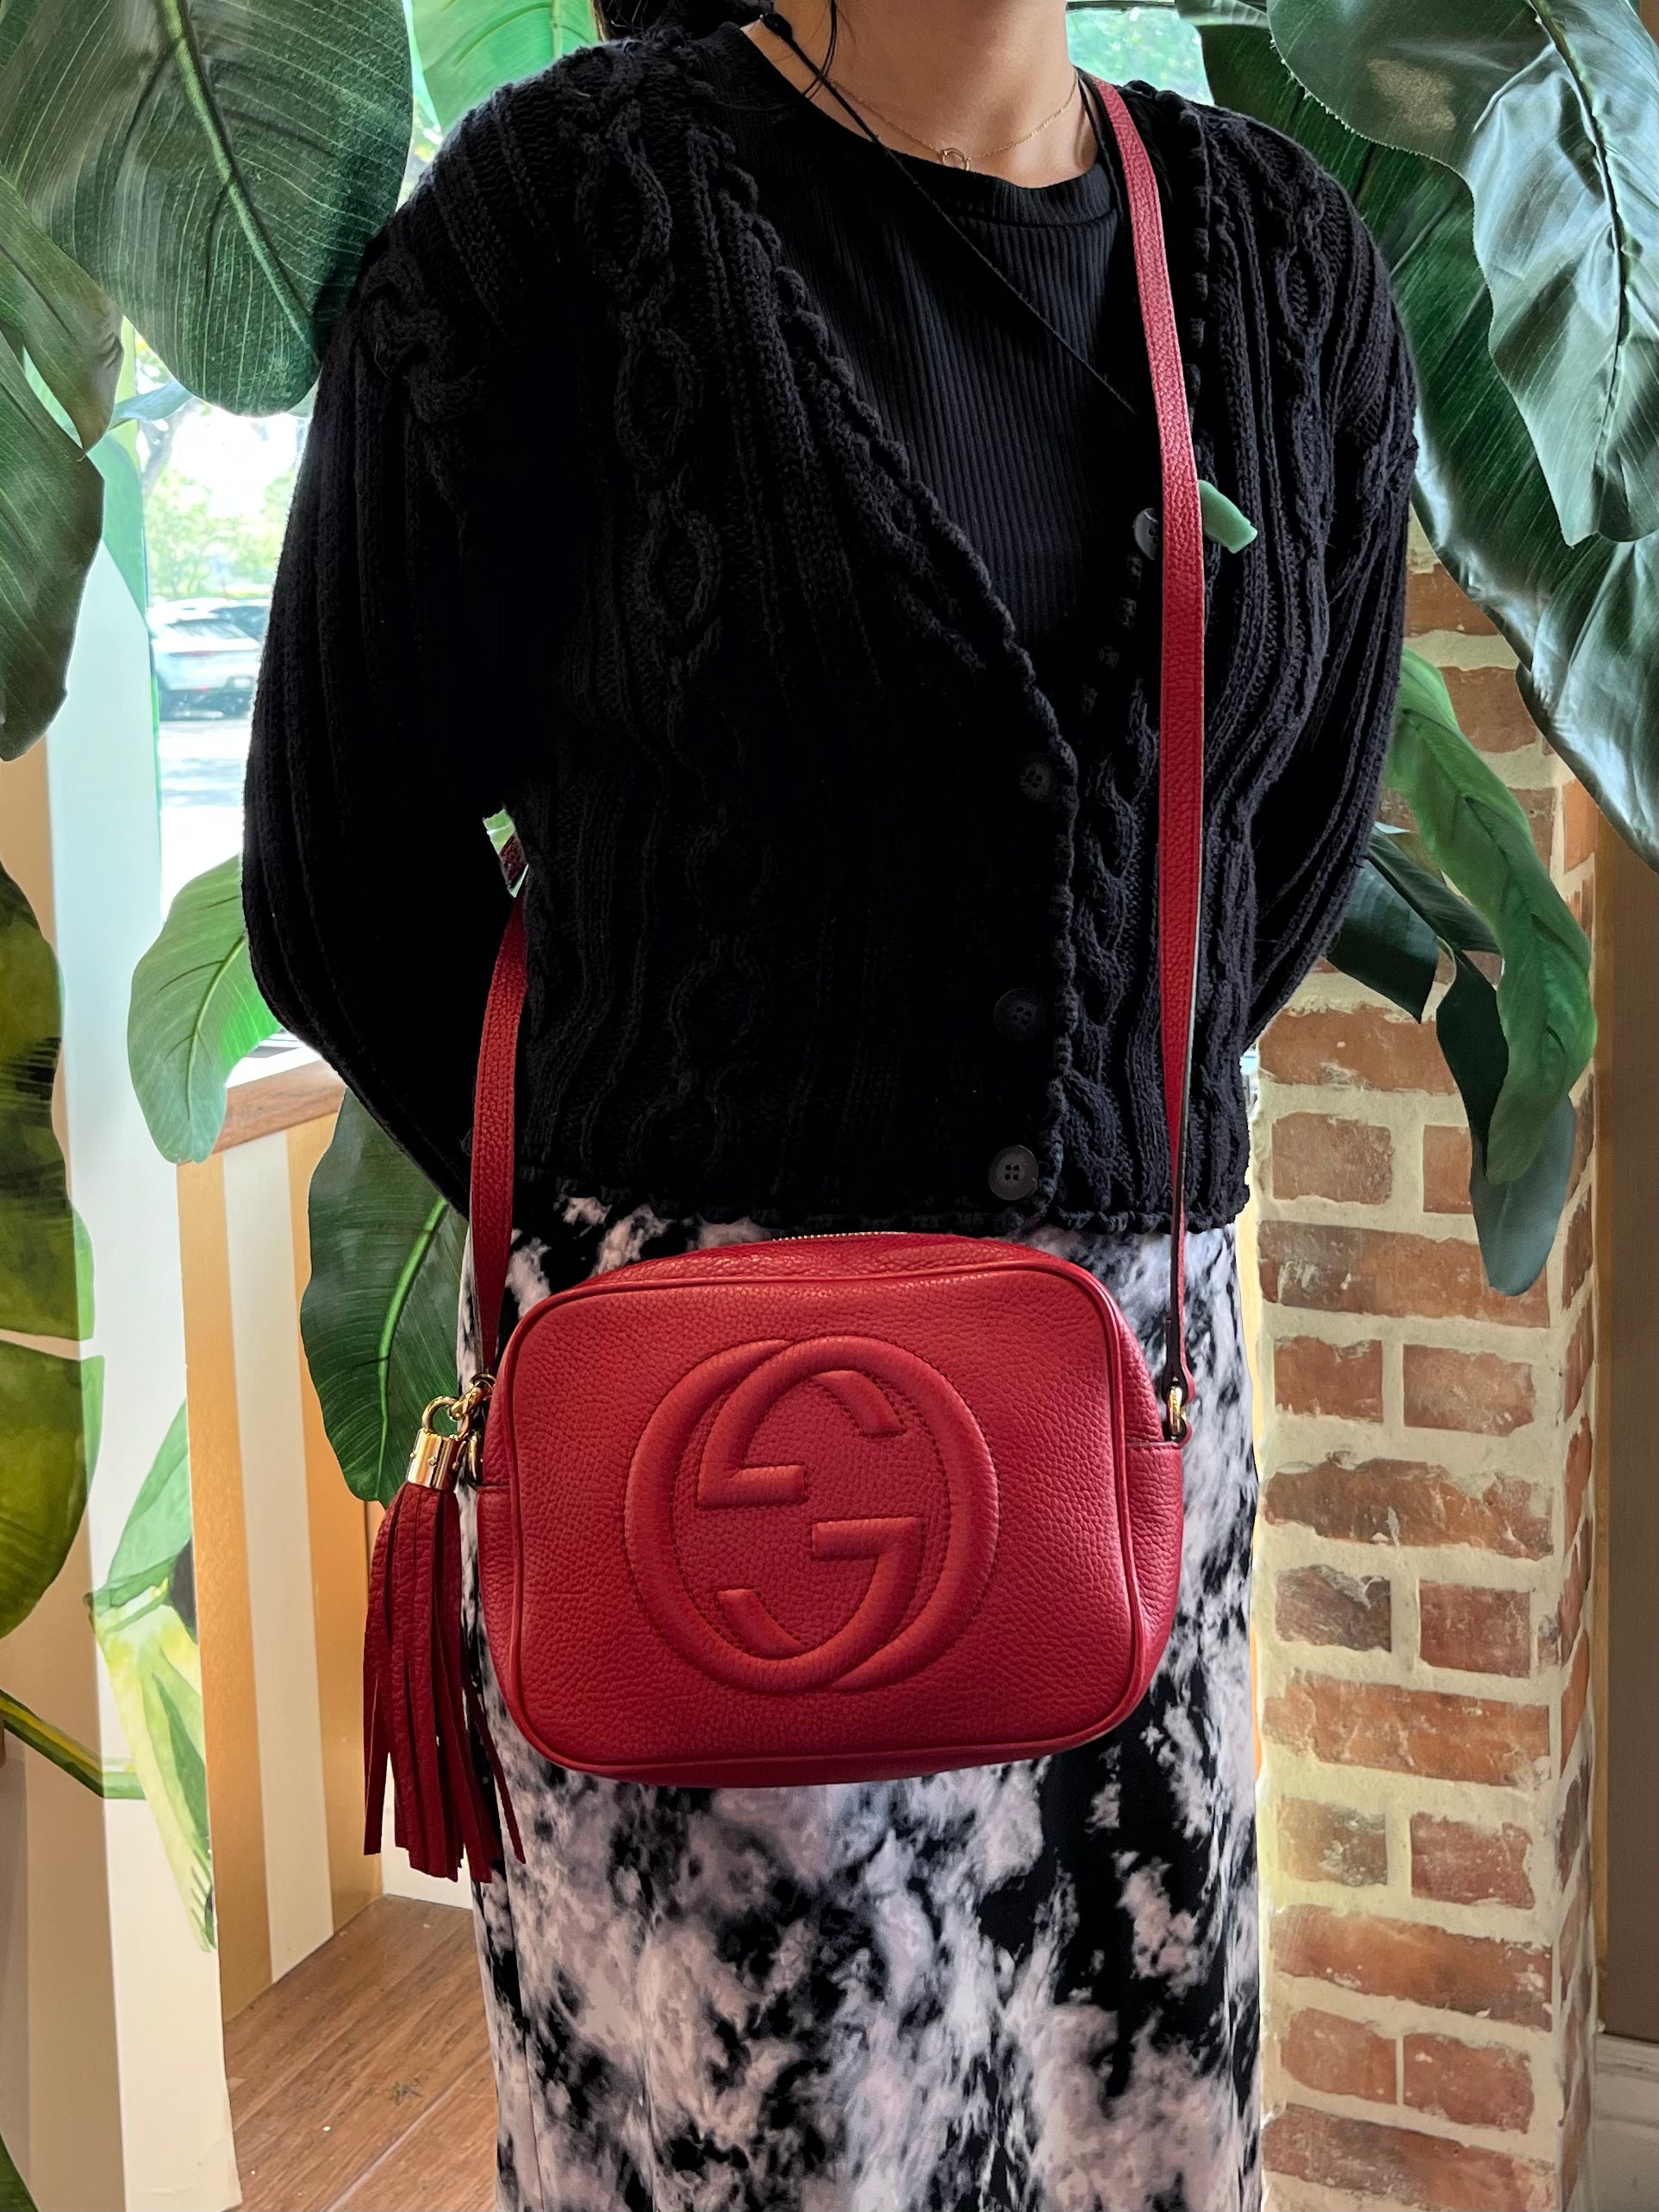 GUCCI Red Pebbled Leather Small Soho Disc Crossbody Bag - The Purse Ladies